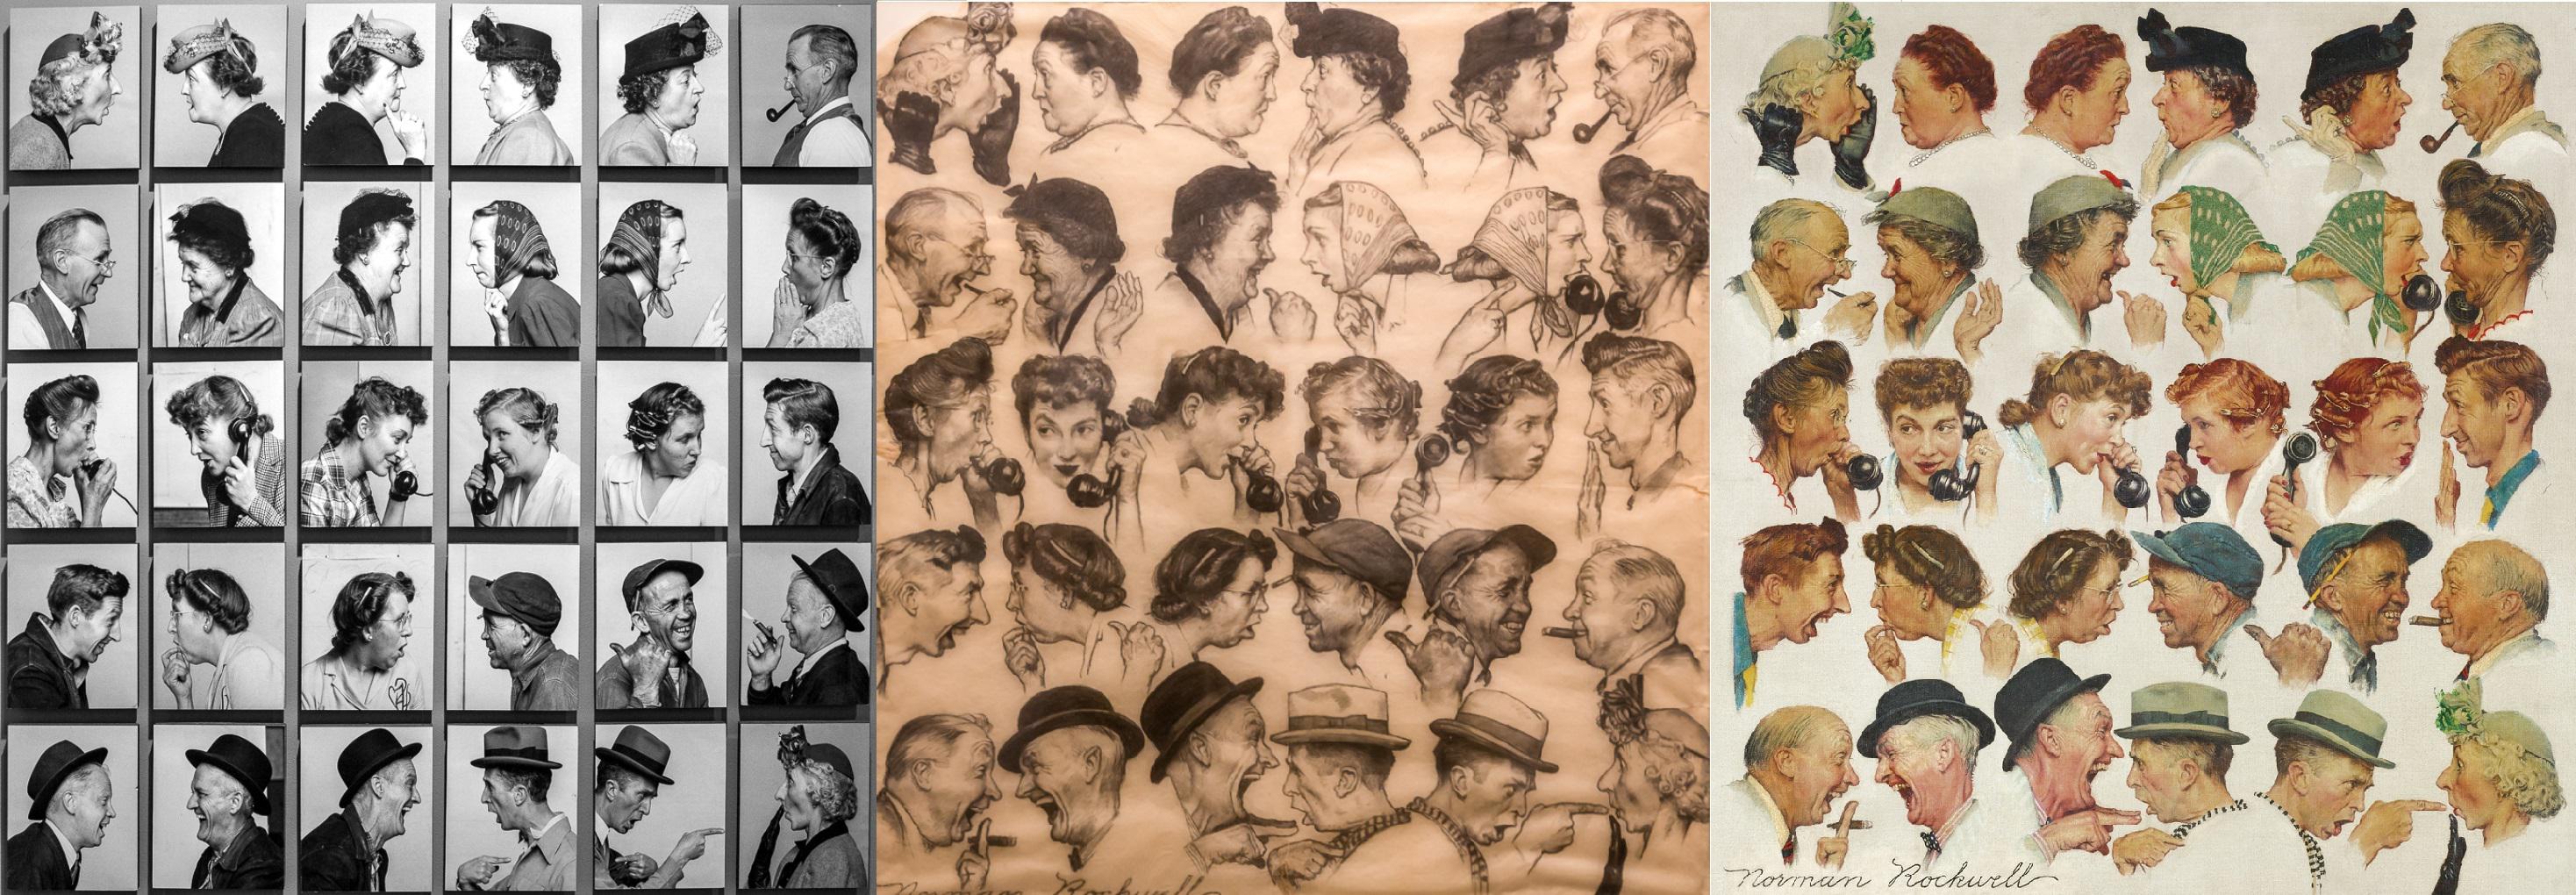 Photo studies, original sketch, and final painting of Norman Rockwell's 'The Gossips', 1948.jpg